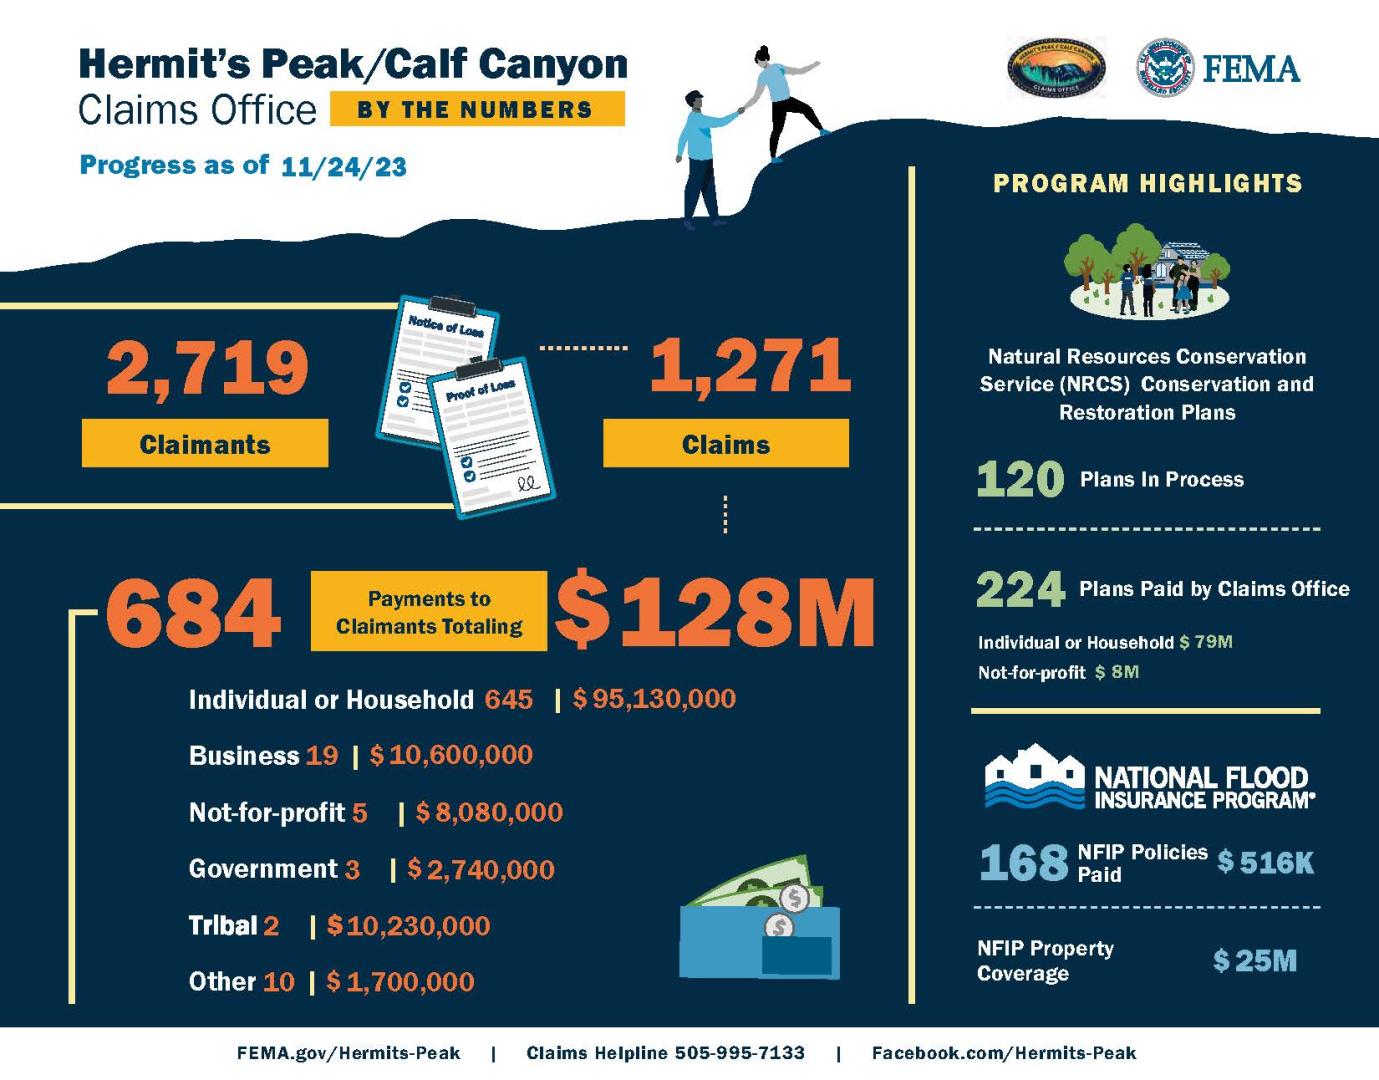 This graphic shows Hermit's Peak/Calf Canyon Progress By The Numbers